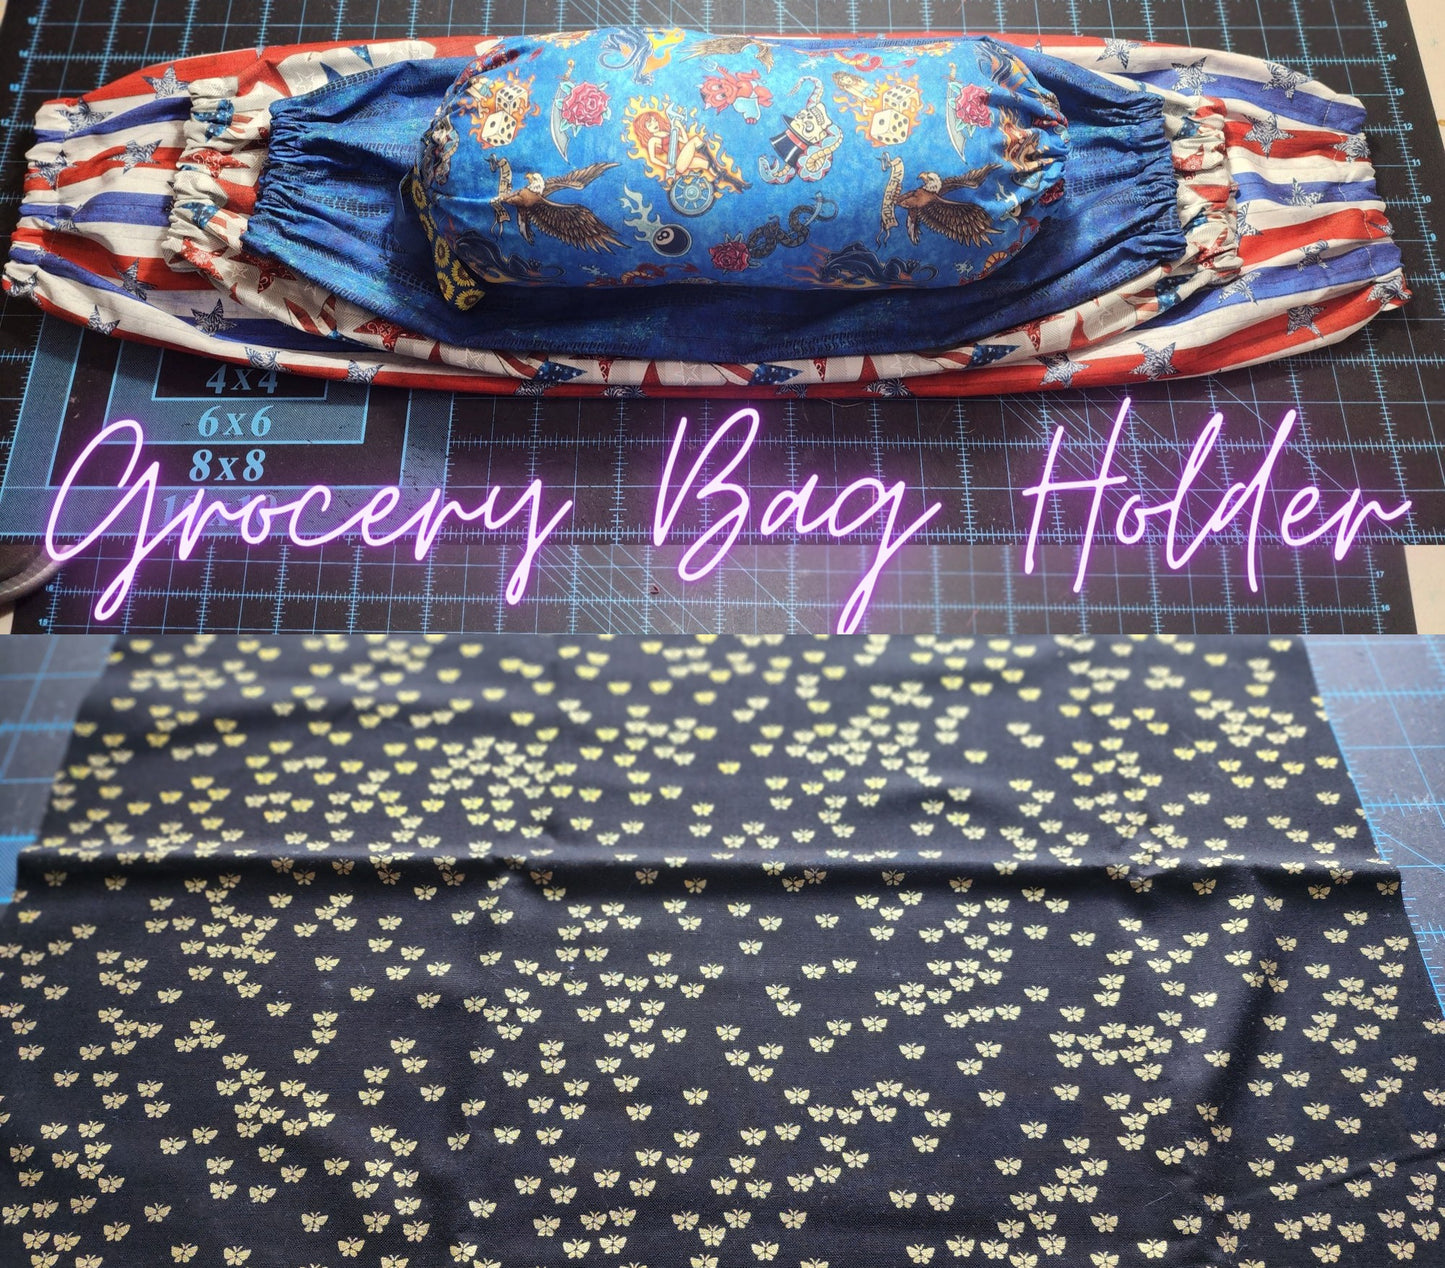 Butterfly, SMALL Grocery Bag Holder | Pre-cut just needs sewn together